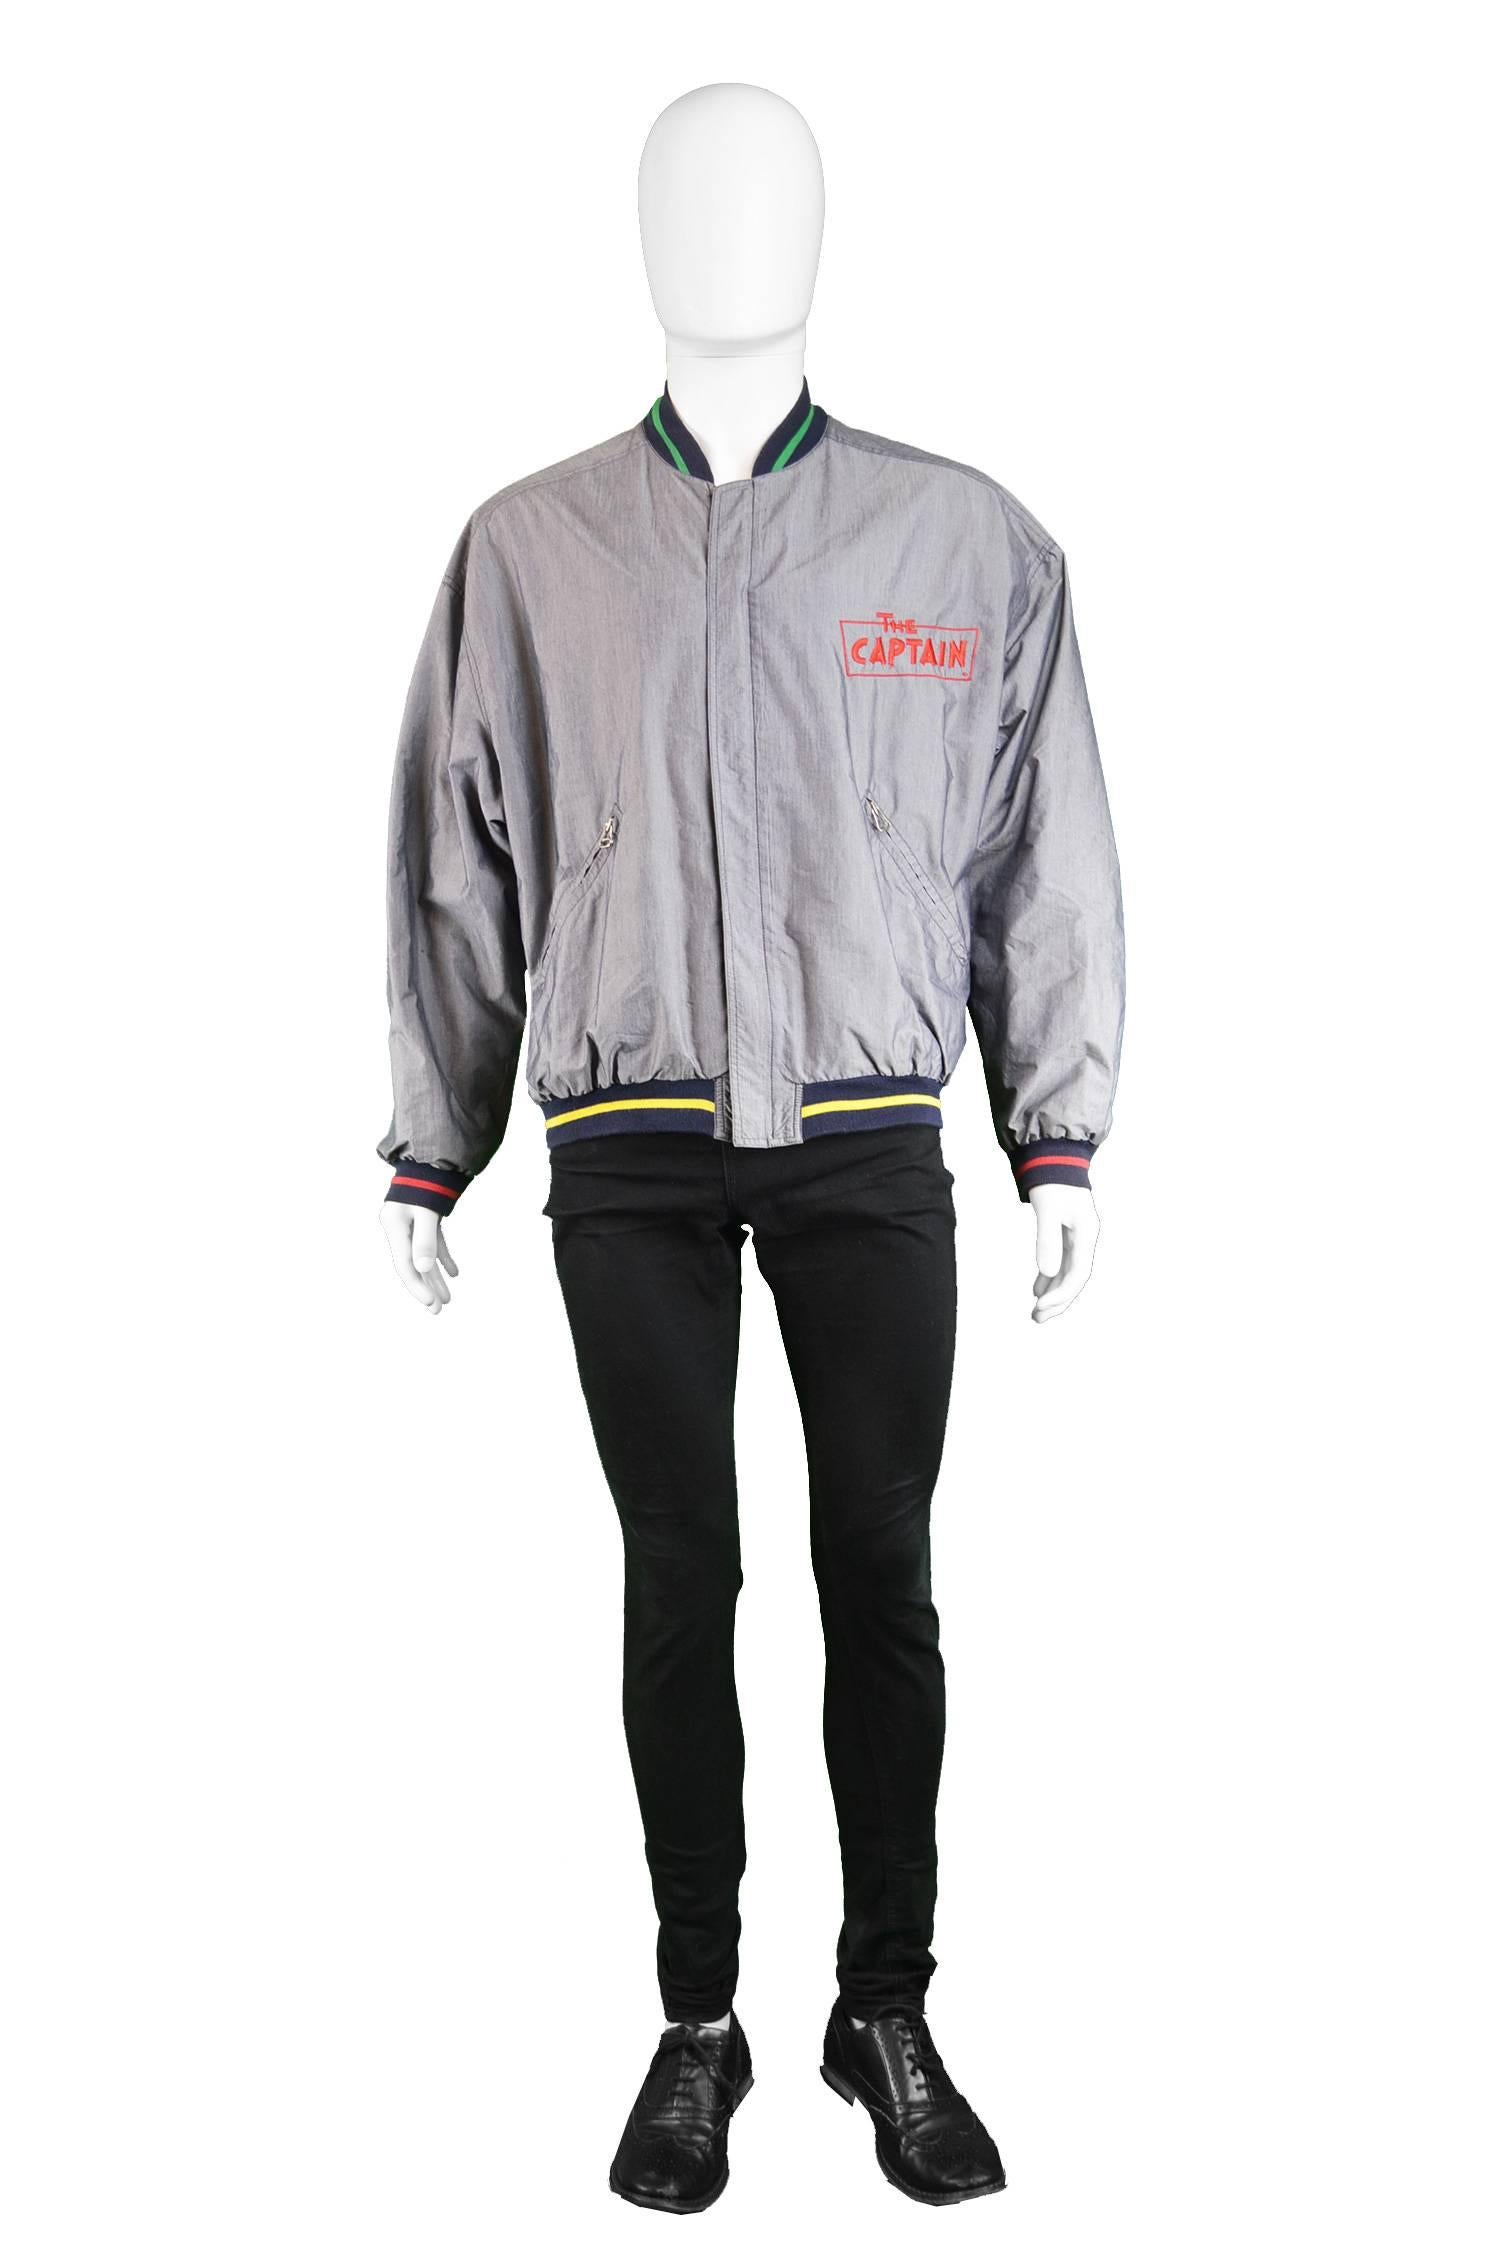 An awesome vintage mens or unisex bomber jacket from the 90s by JC de Castelbajac in a lightweight grey fabric with subtle sheen and a red stripe on the cuffs, yellow on the hem and green on the collar for a fun, whimsical look that Castelbajac was